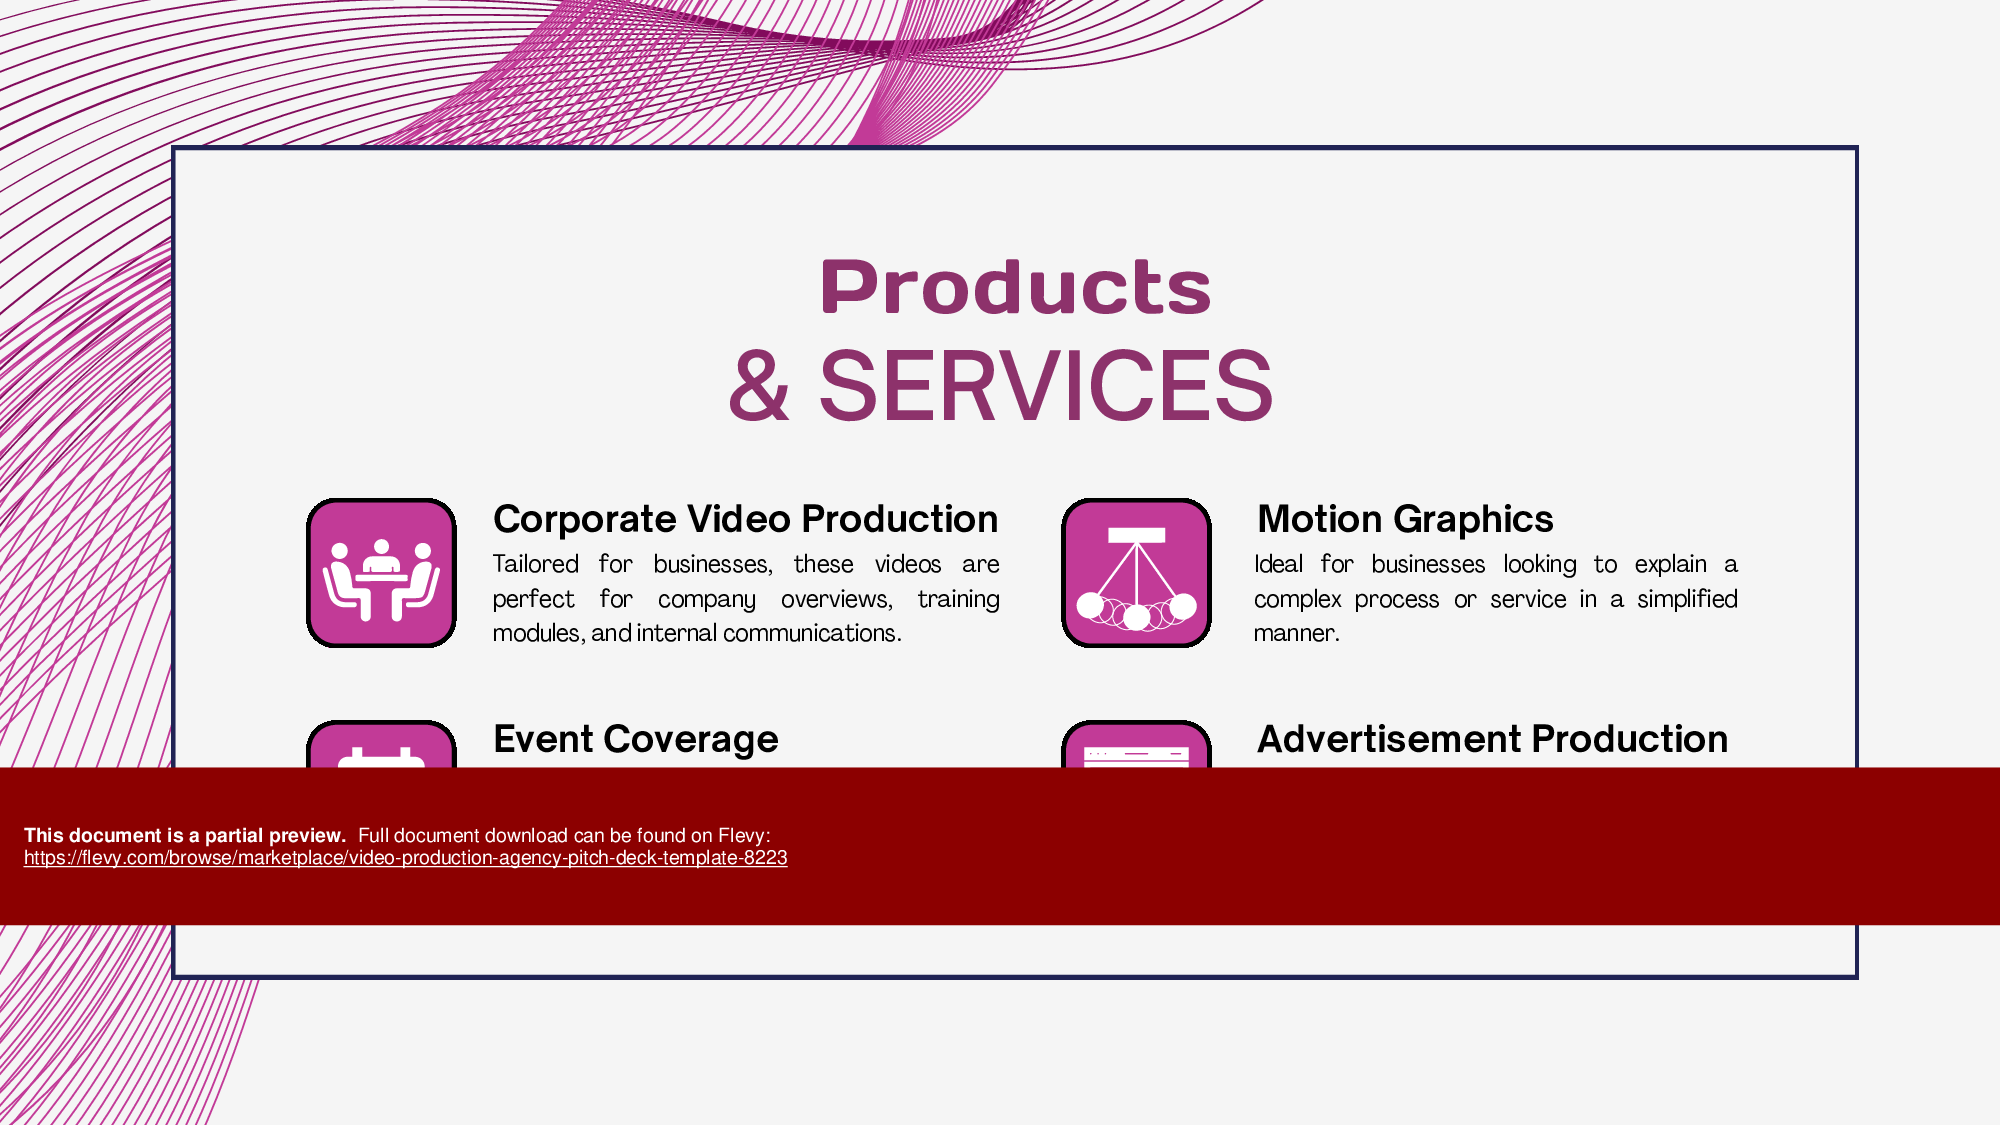 Video Production Agency Pitch Deck Template (32-page PDF document) Preview Image